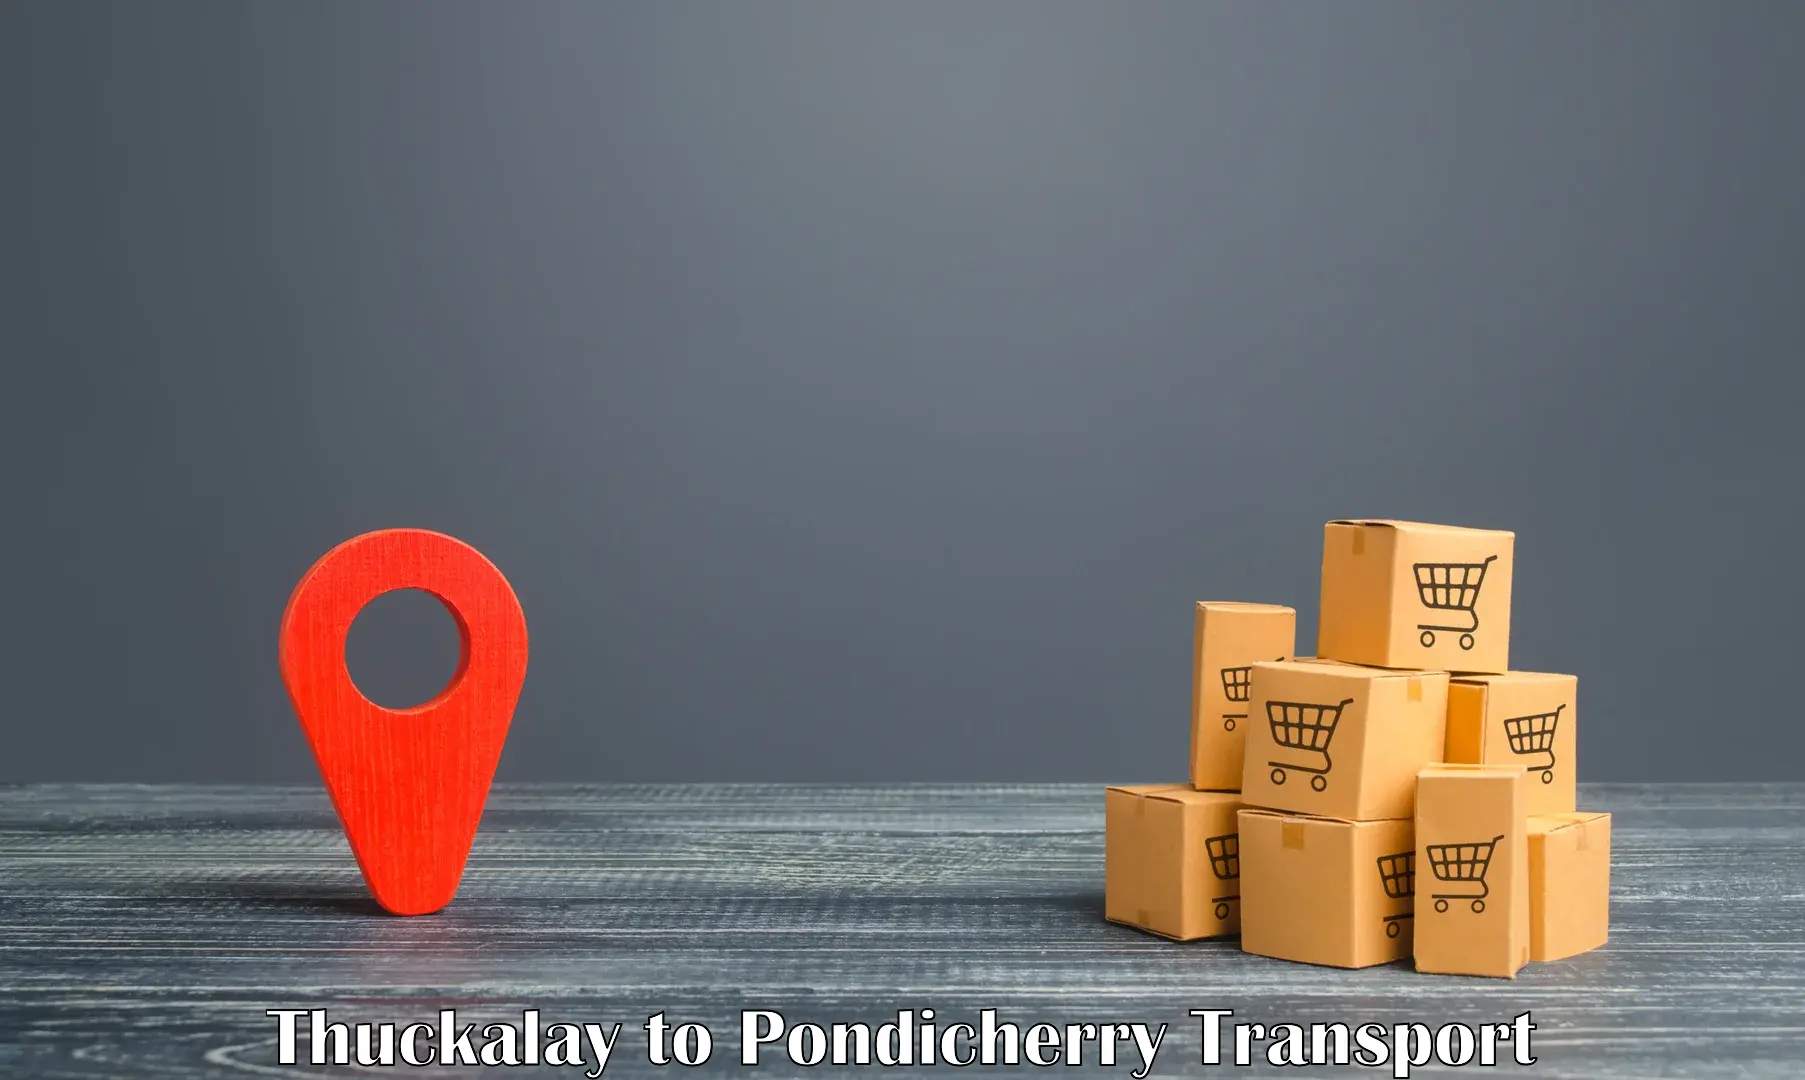 Online transport booking Thuckalay to Pondicherry